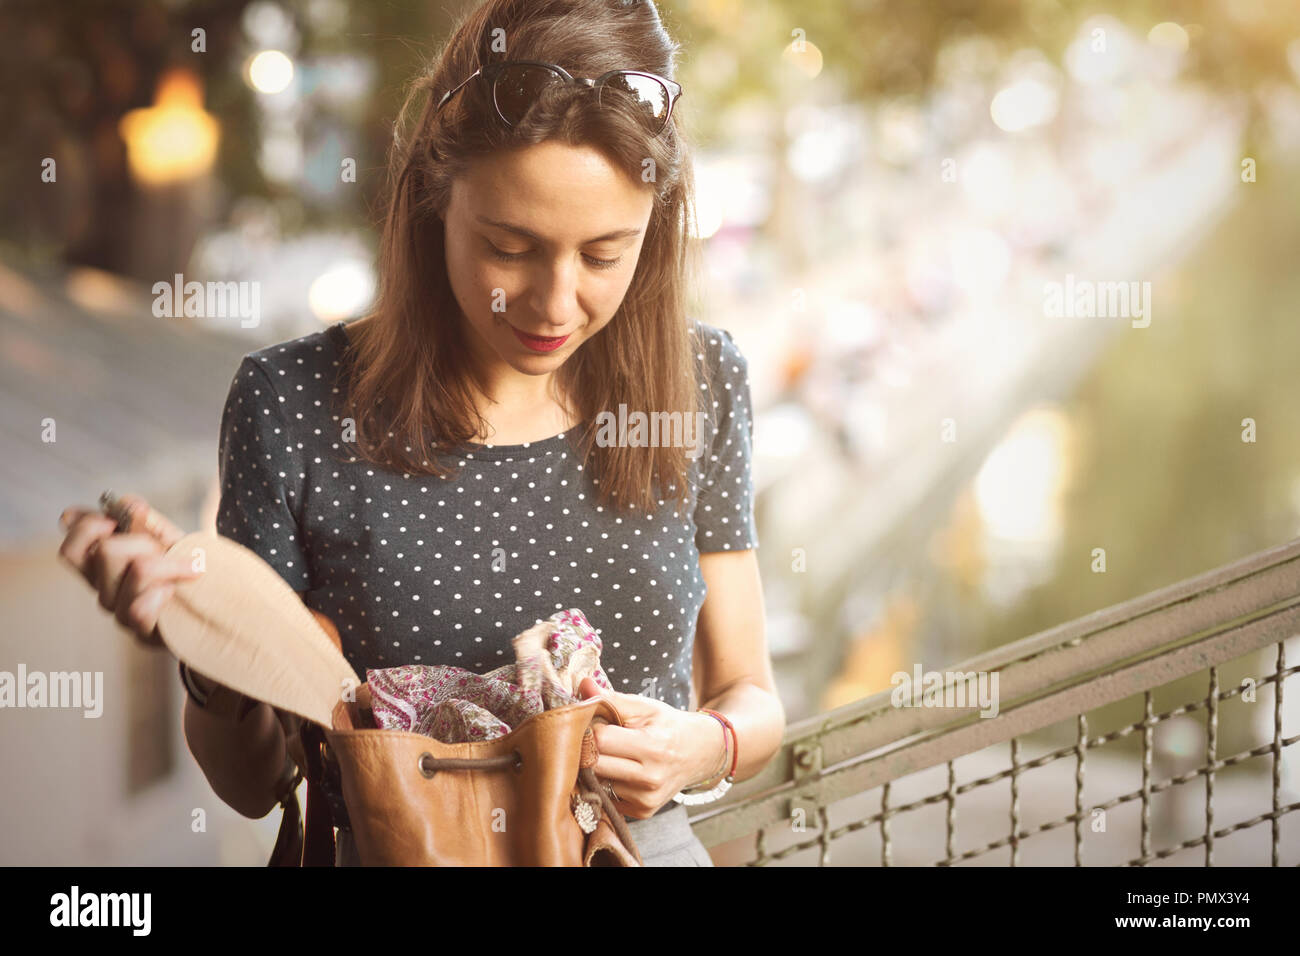 Young woman looking inside her bag Stock Photo